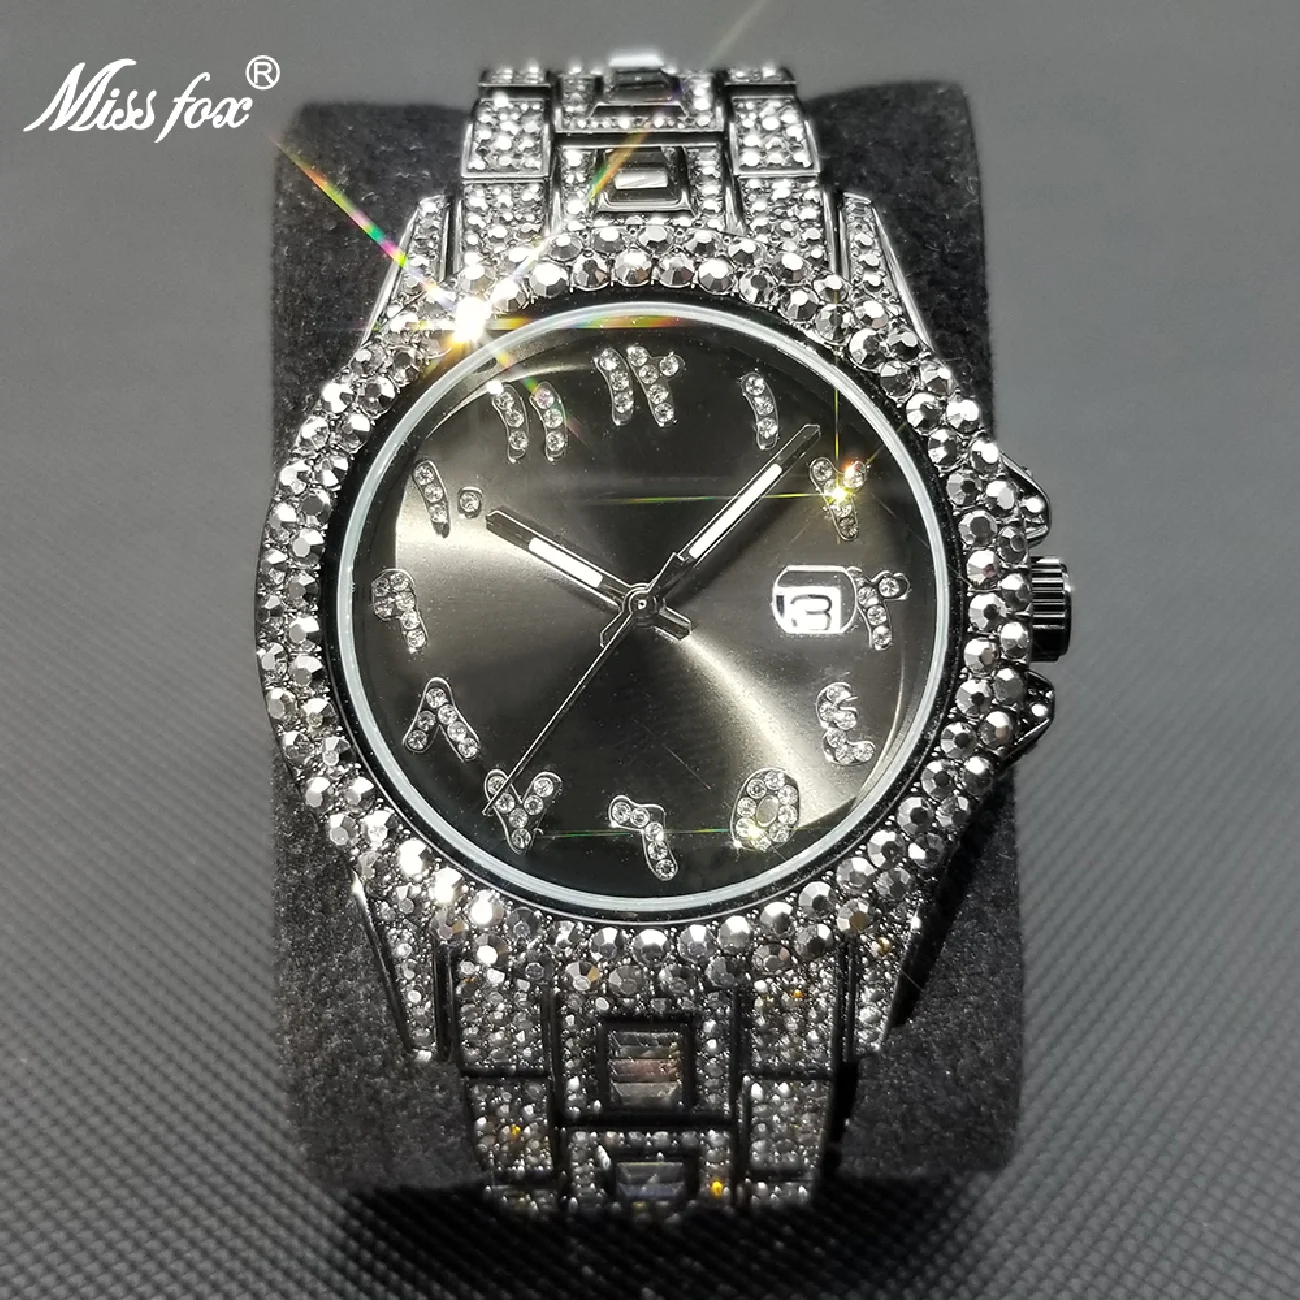 

MISSFOX Black Ice Out Men's Watches Luxury Brand Diamond Stainless Steel Watch Fashion New Automatic Date Relogio Masculino Gift